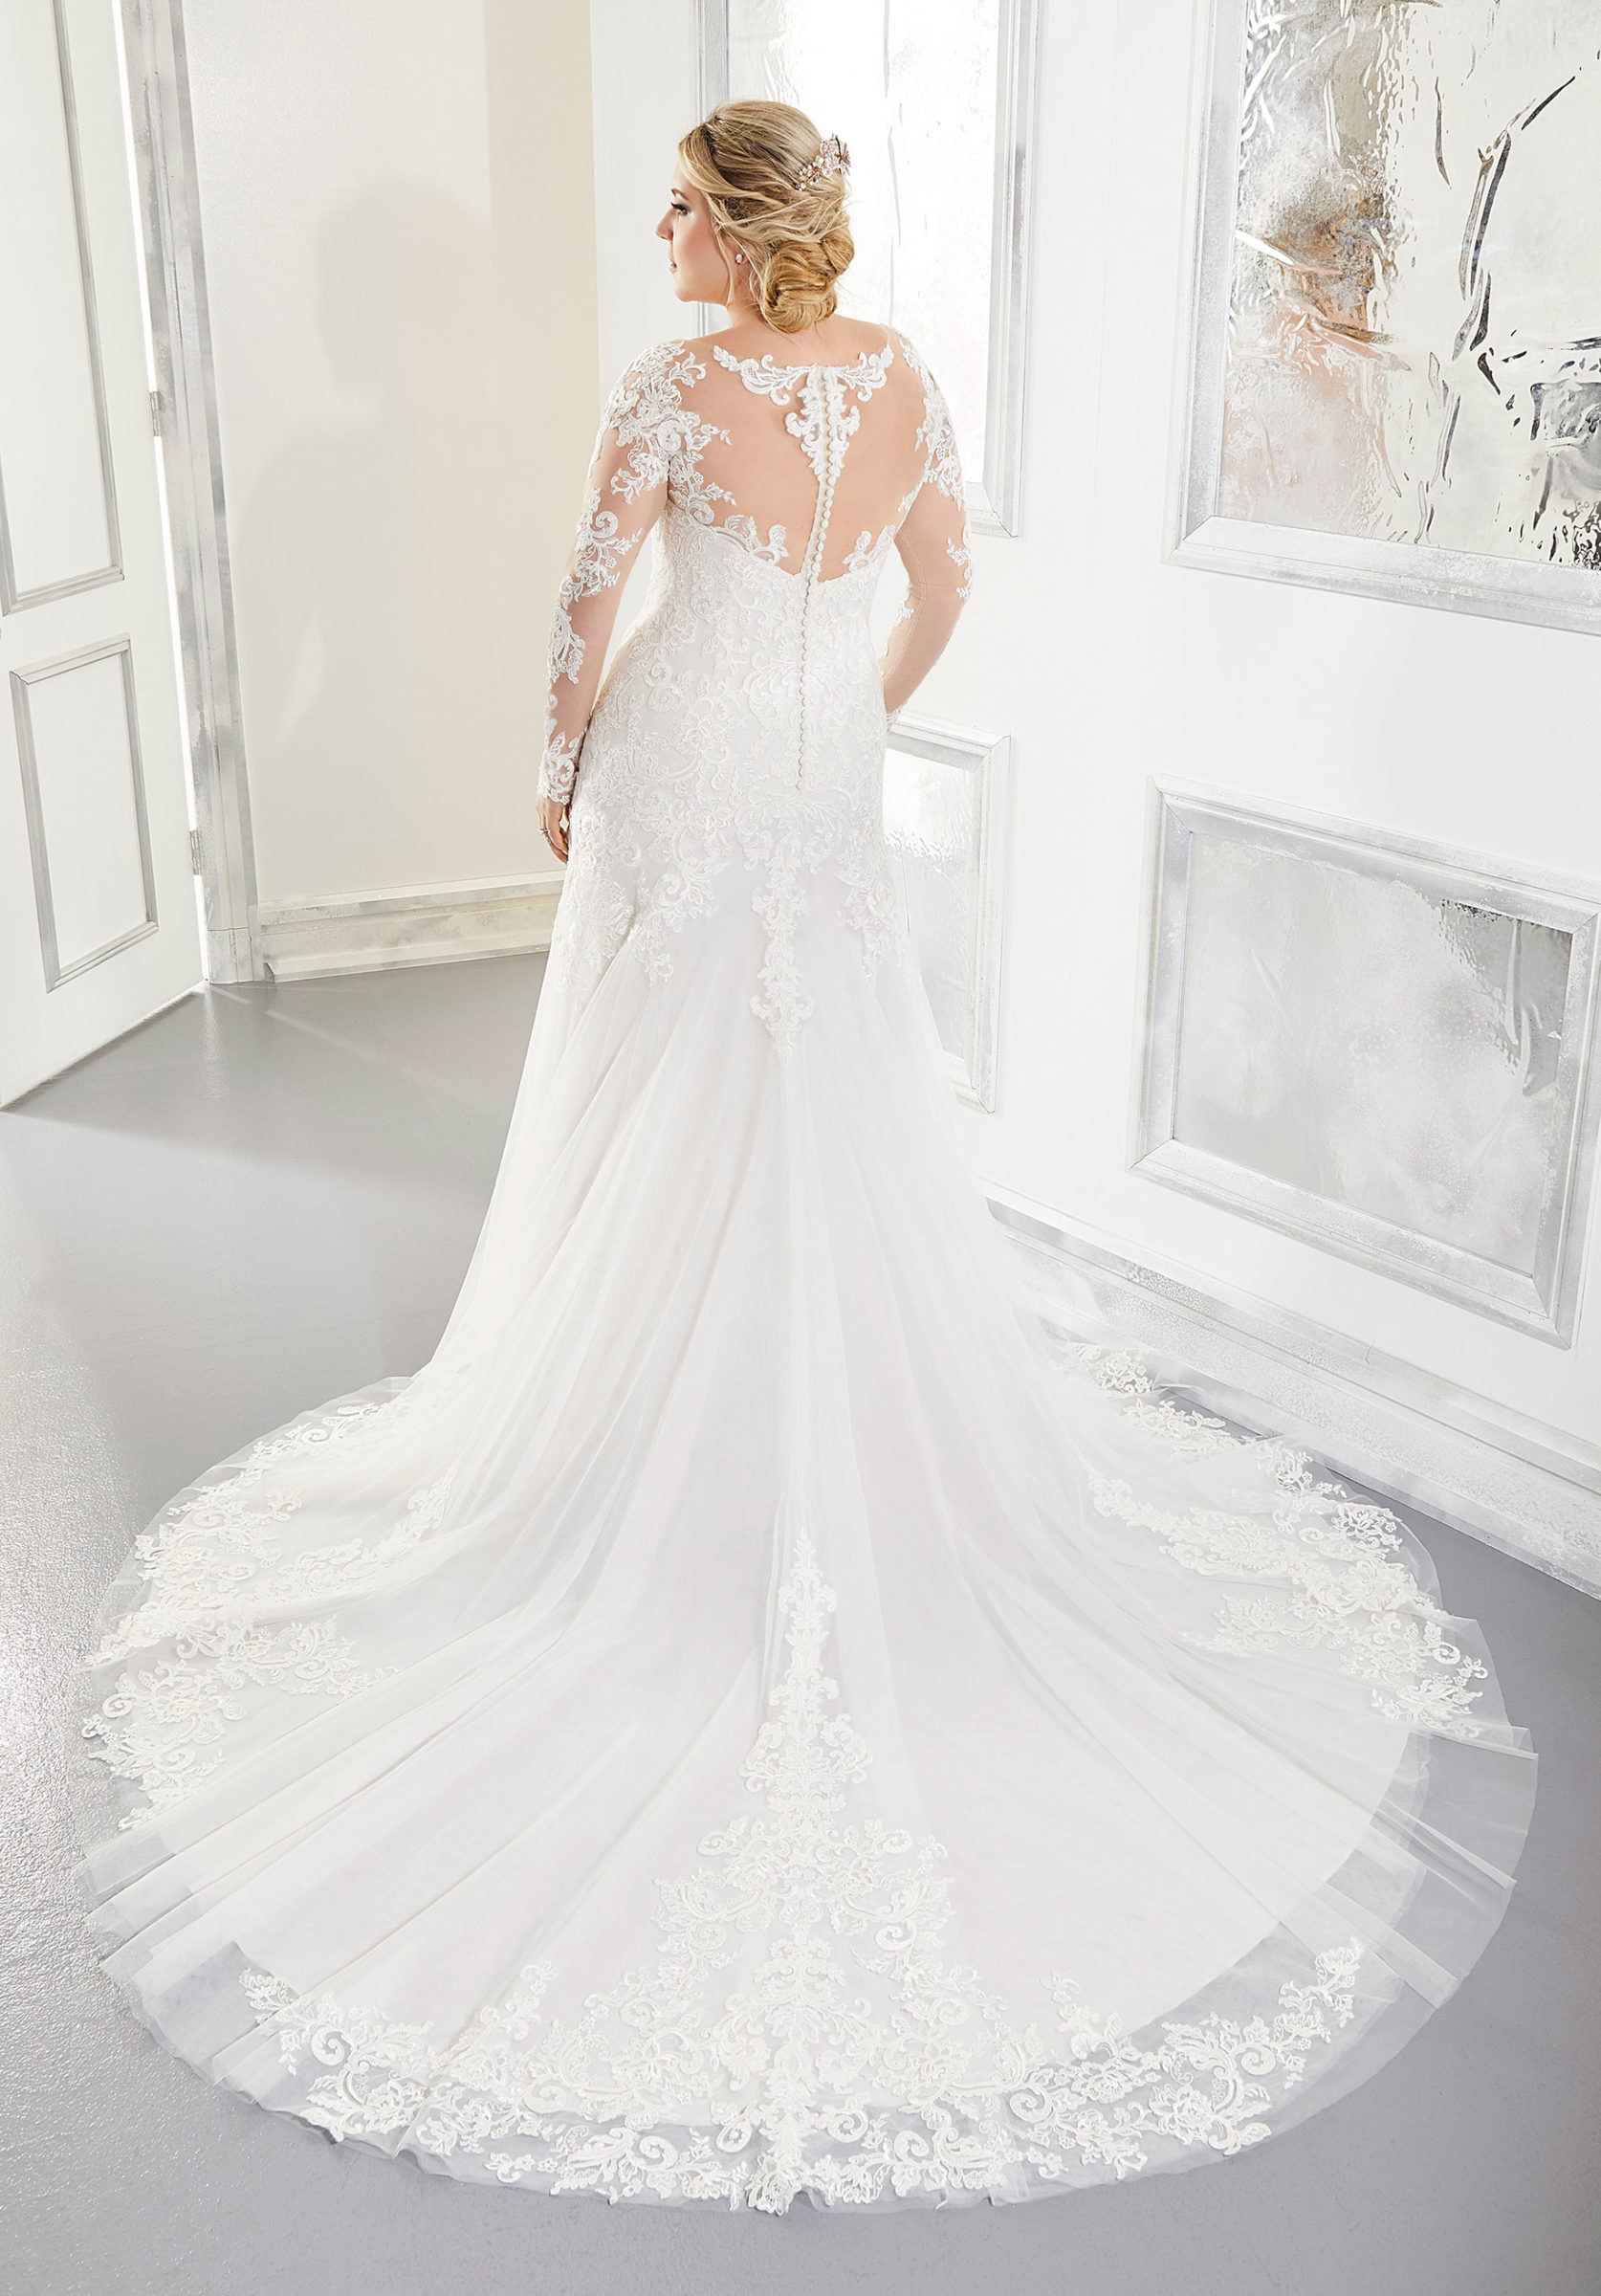 Long-sleeve naked lace bridal gown